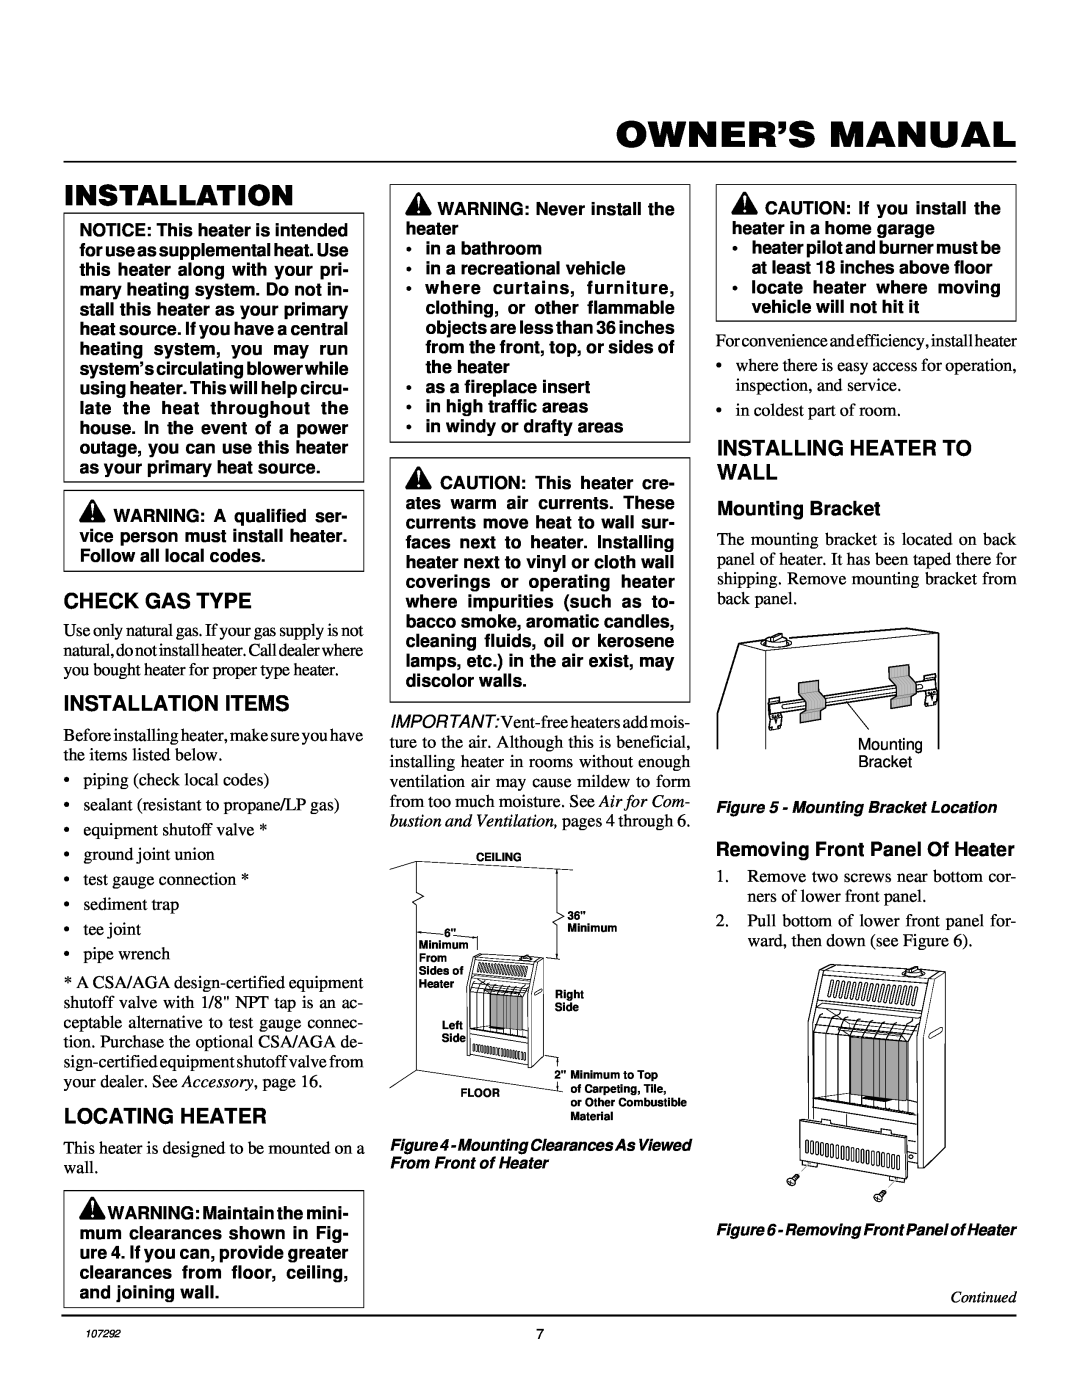 Desa CGR2N installation manual Check Gas Type, Installation Items, Installing Heater To Wall, Locating Heater 